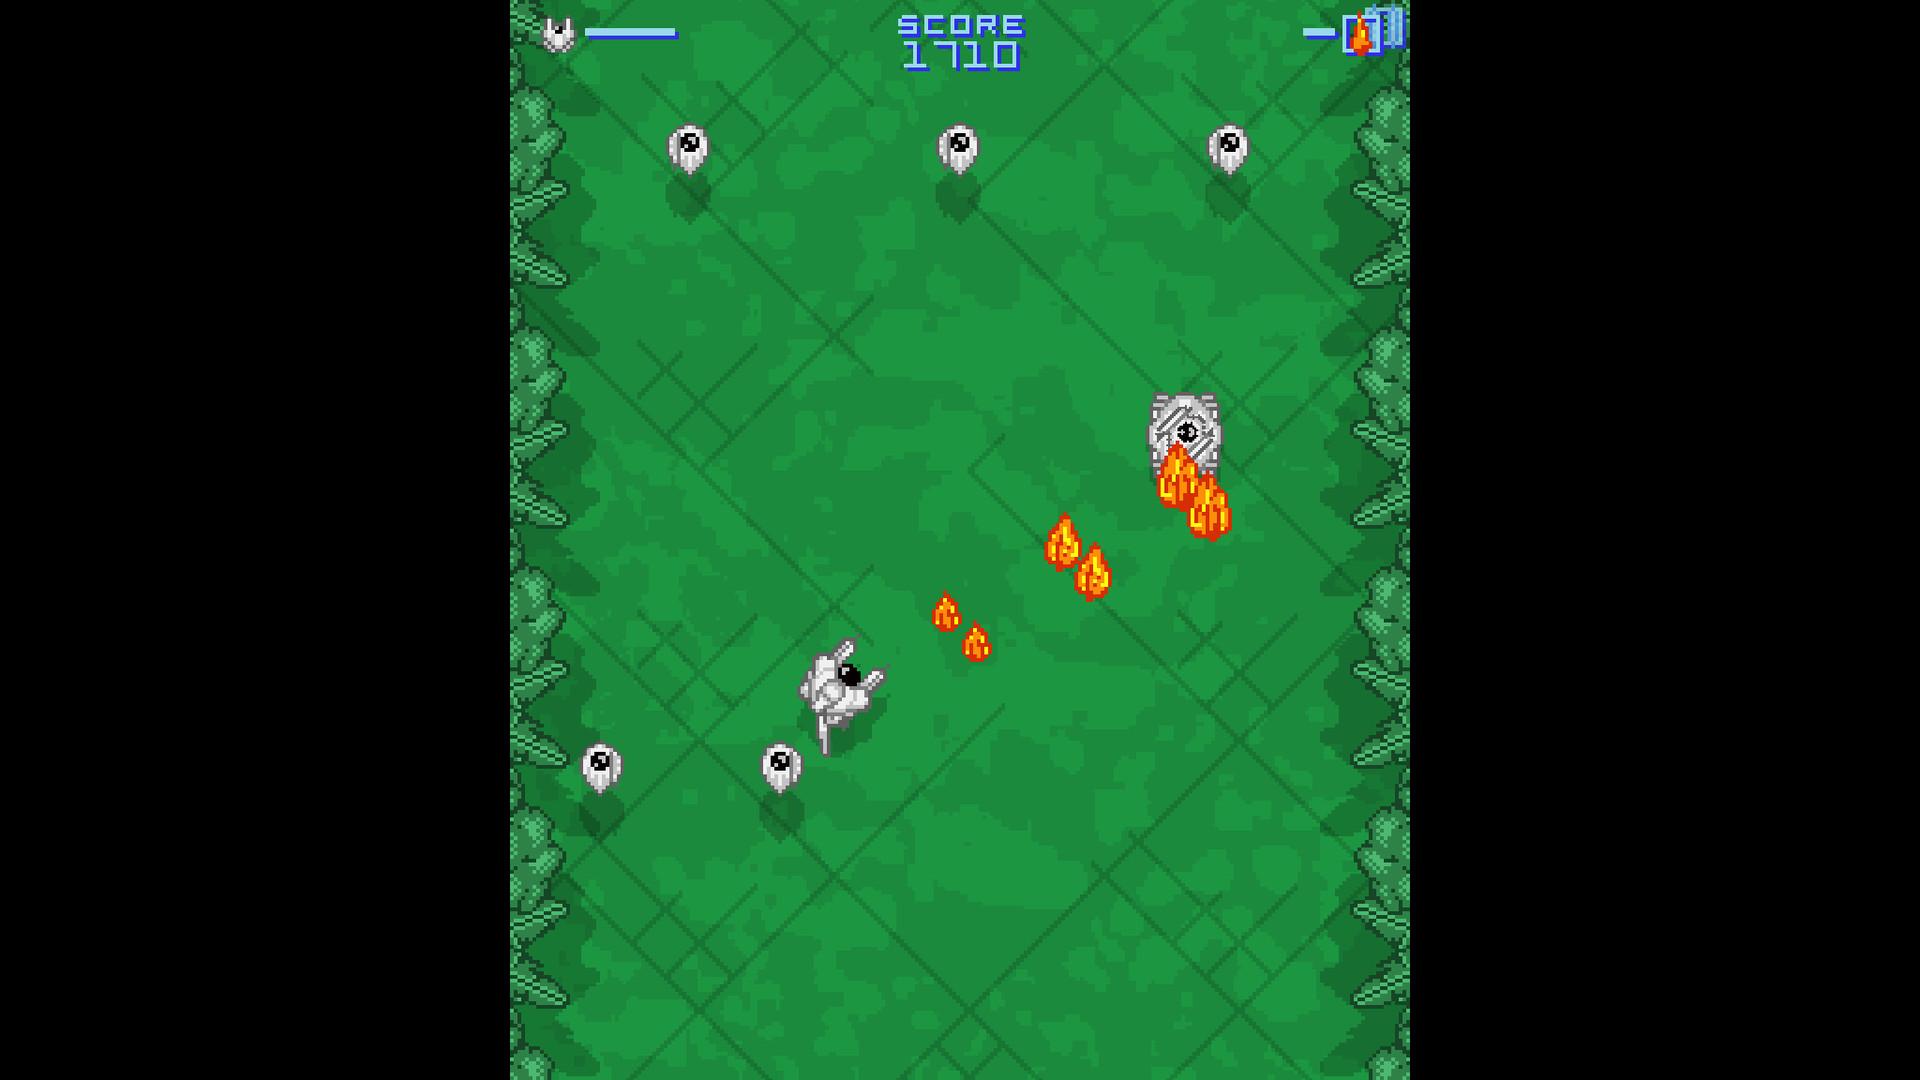 Screenshot №3 from game Mobile Astro